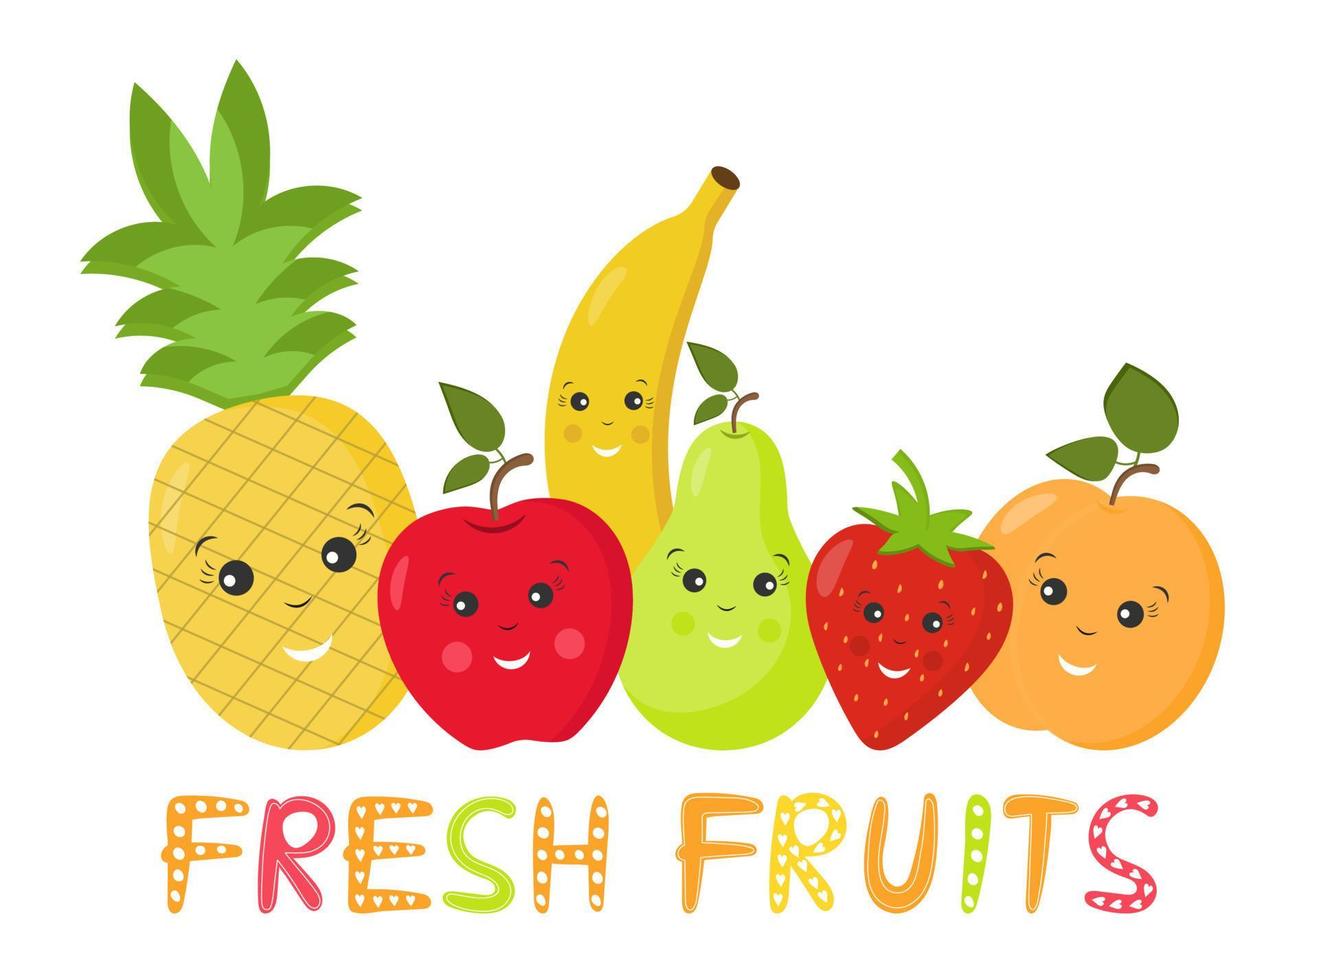 Collection of fresh smiling fruits. Set of cute smiling funny childish fruits. Banana, apple, pear, cherry, strawberry, apricot. Design for children's stationery, textiles, educational materials. vector